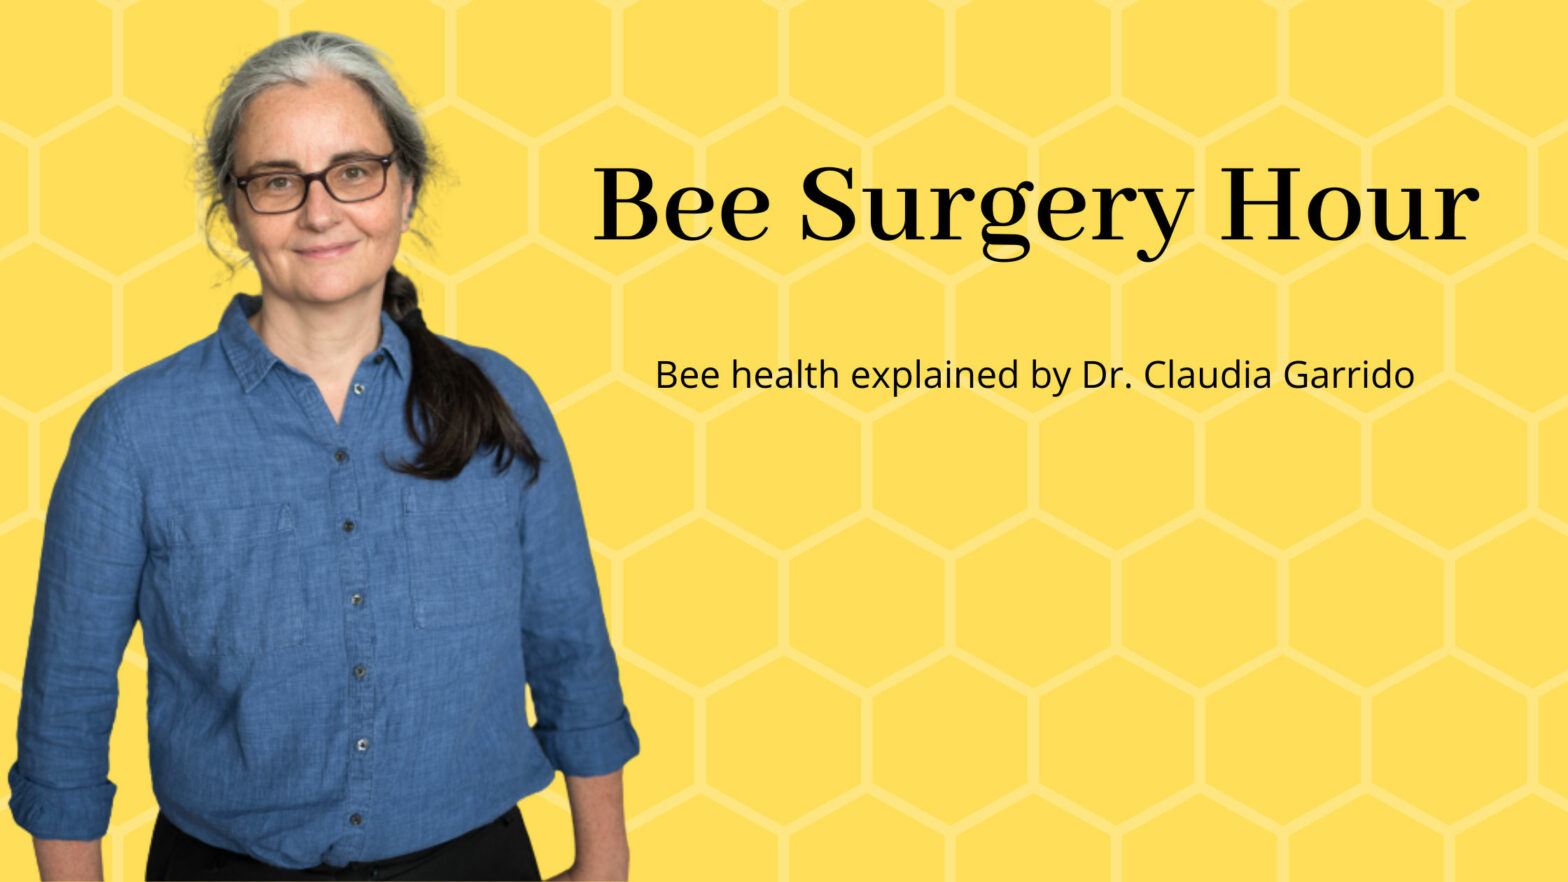 bee health, bees in winter, knowledge, varroa treatments, good practices, glory in prevention, honey bee health, oxalic acid treatments, Bee Surgery Hours